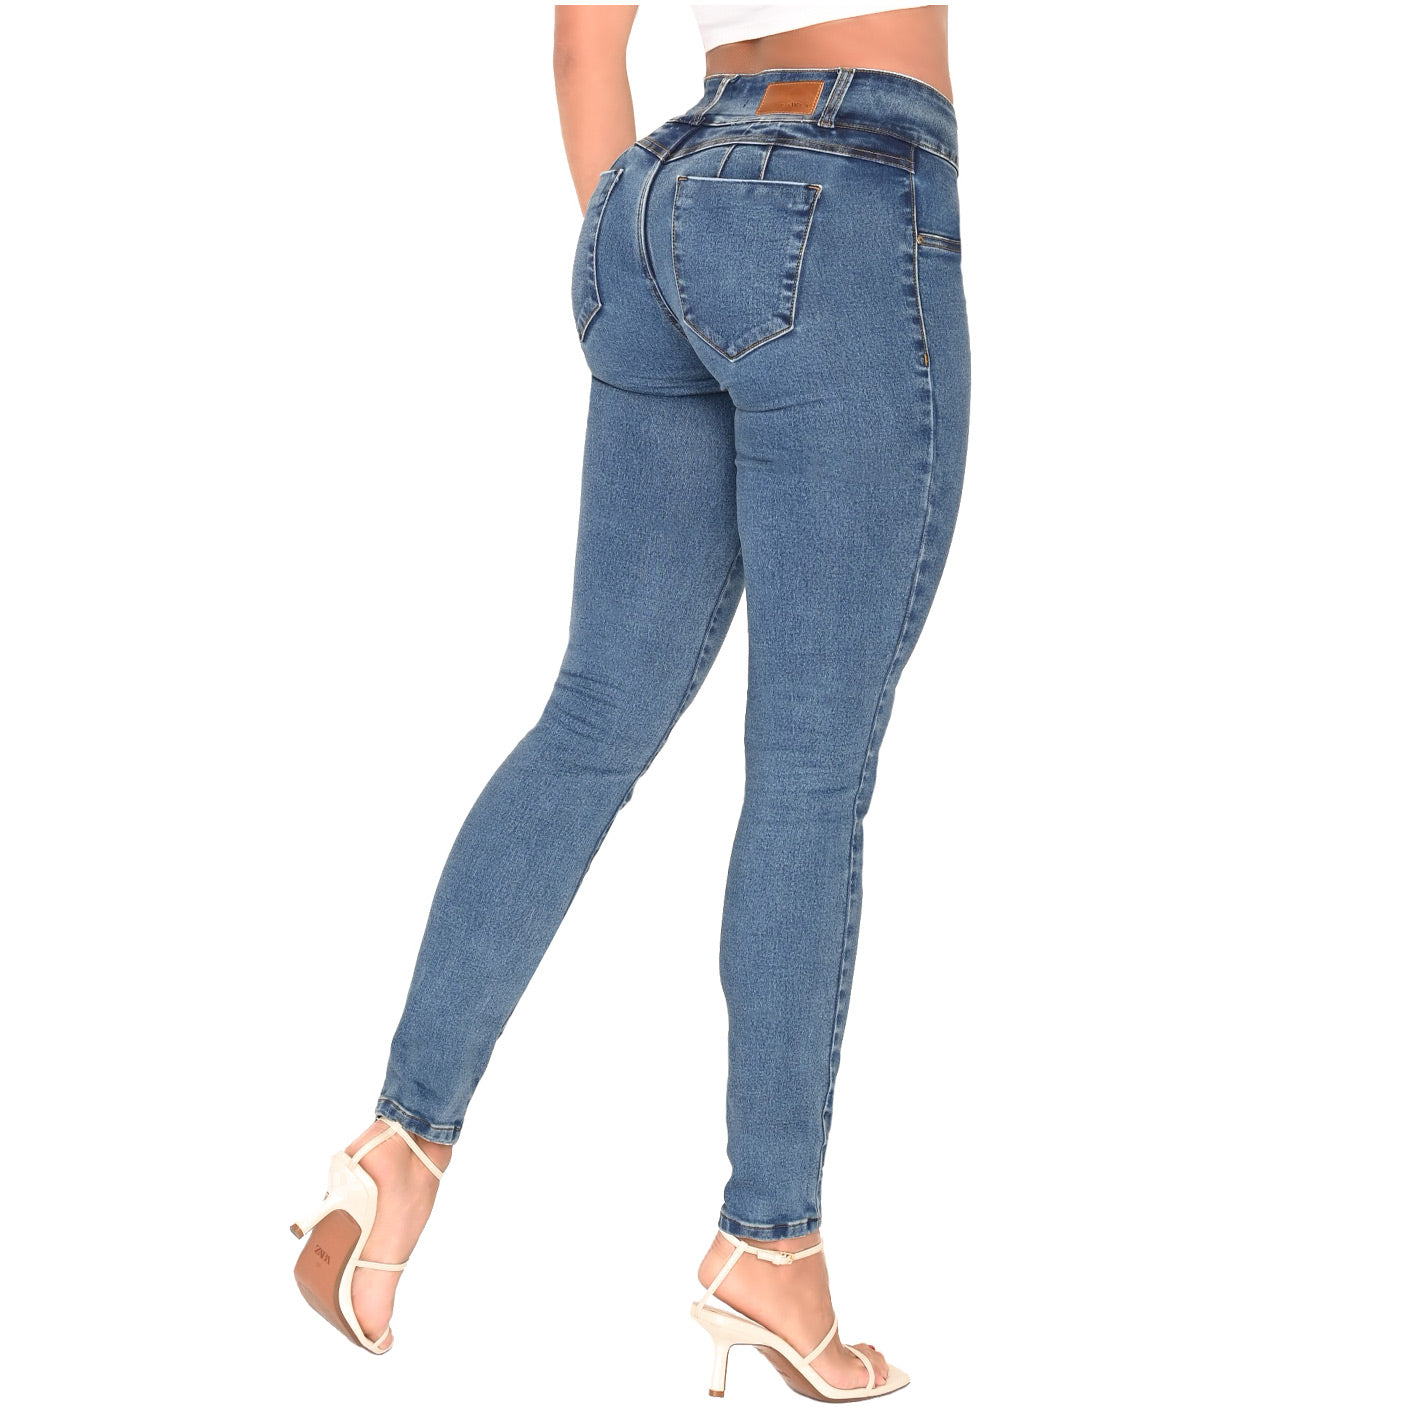 LOWLA 217988| Colombian Jeans | Butt Lift Jeans | Chica Sexy